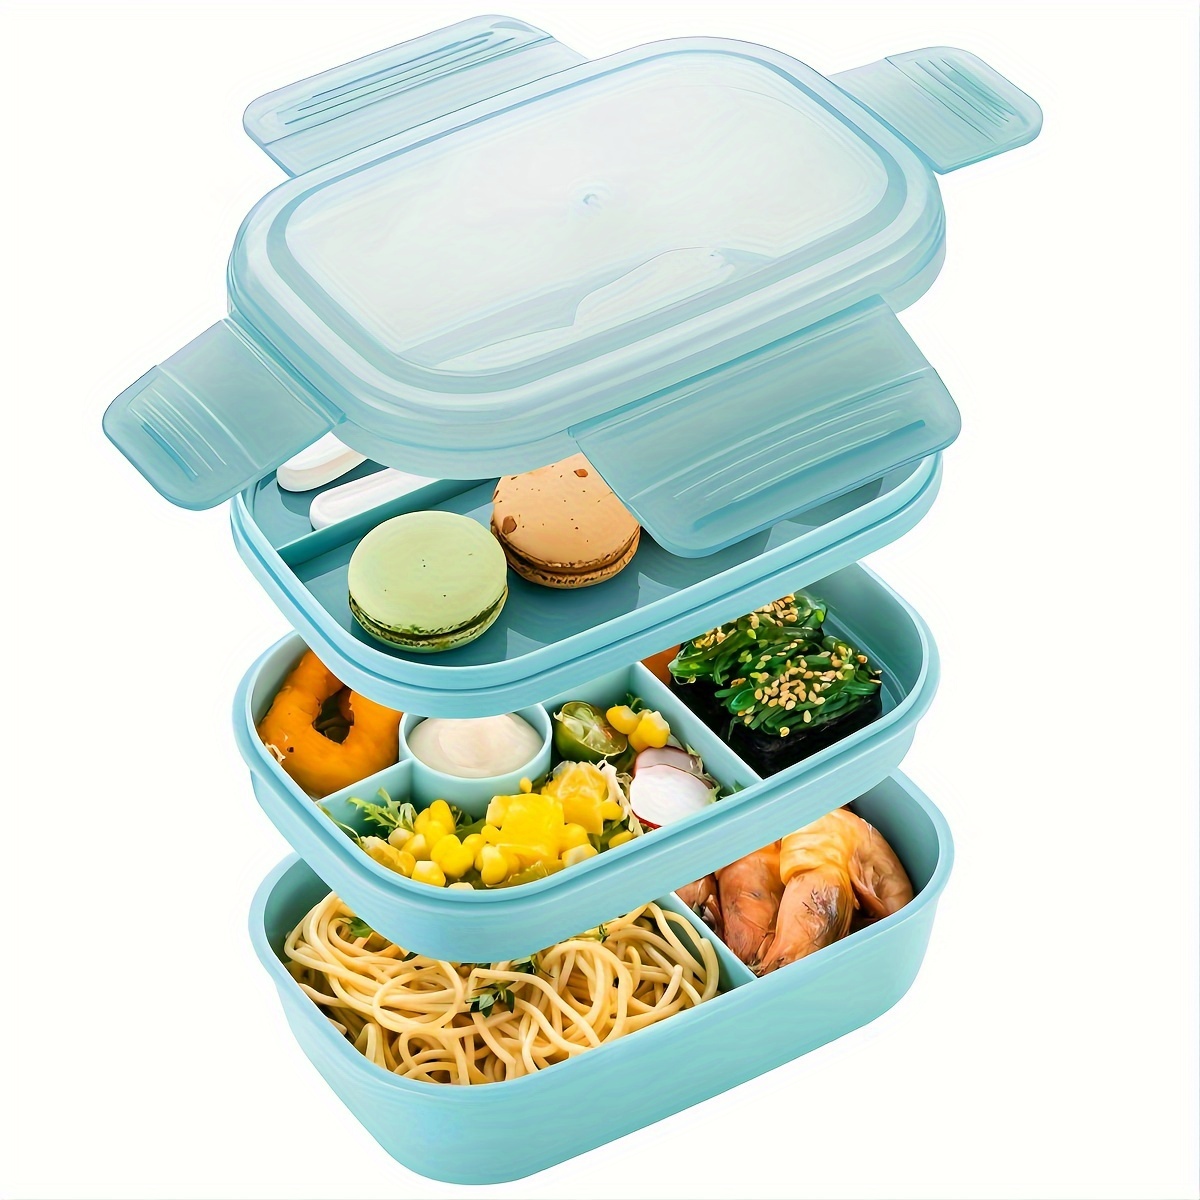 

1pc Portable Lunch Box, 3 Stackable Bento Lunch Containers For Adults, Modern Minimalist Design Bento Box With Utensil Set, Leak-proof Lunchbox For Dining Out, Work, Picnic